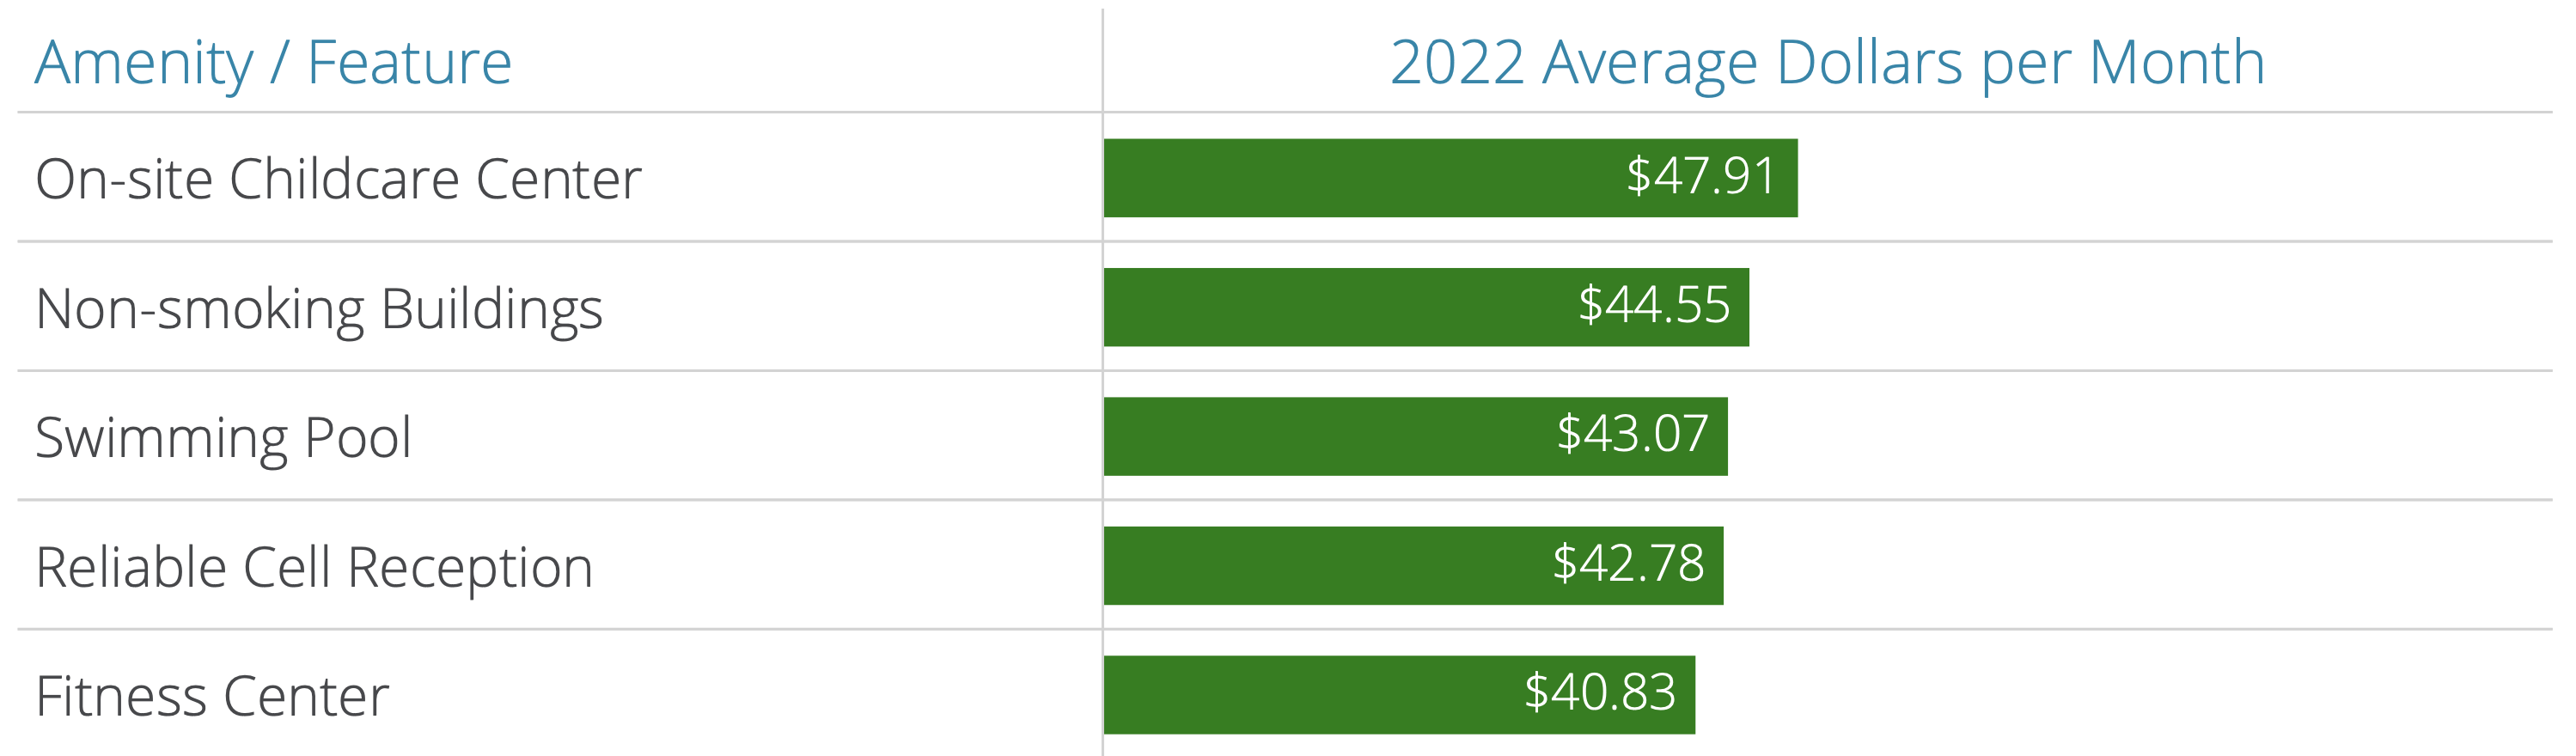 Top 5 Community Features Pricing in 2022